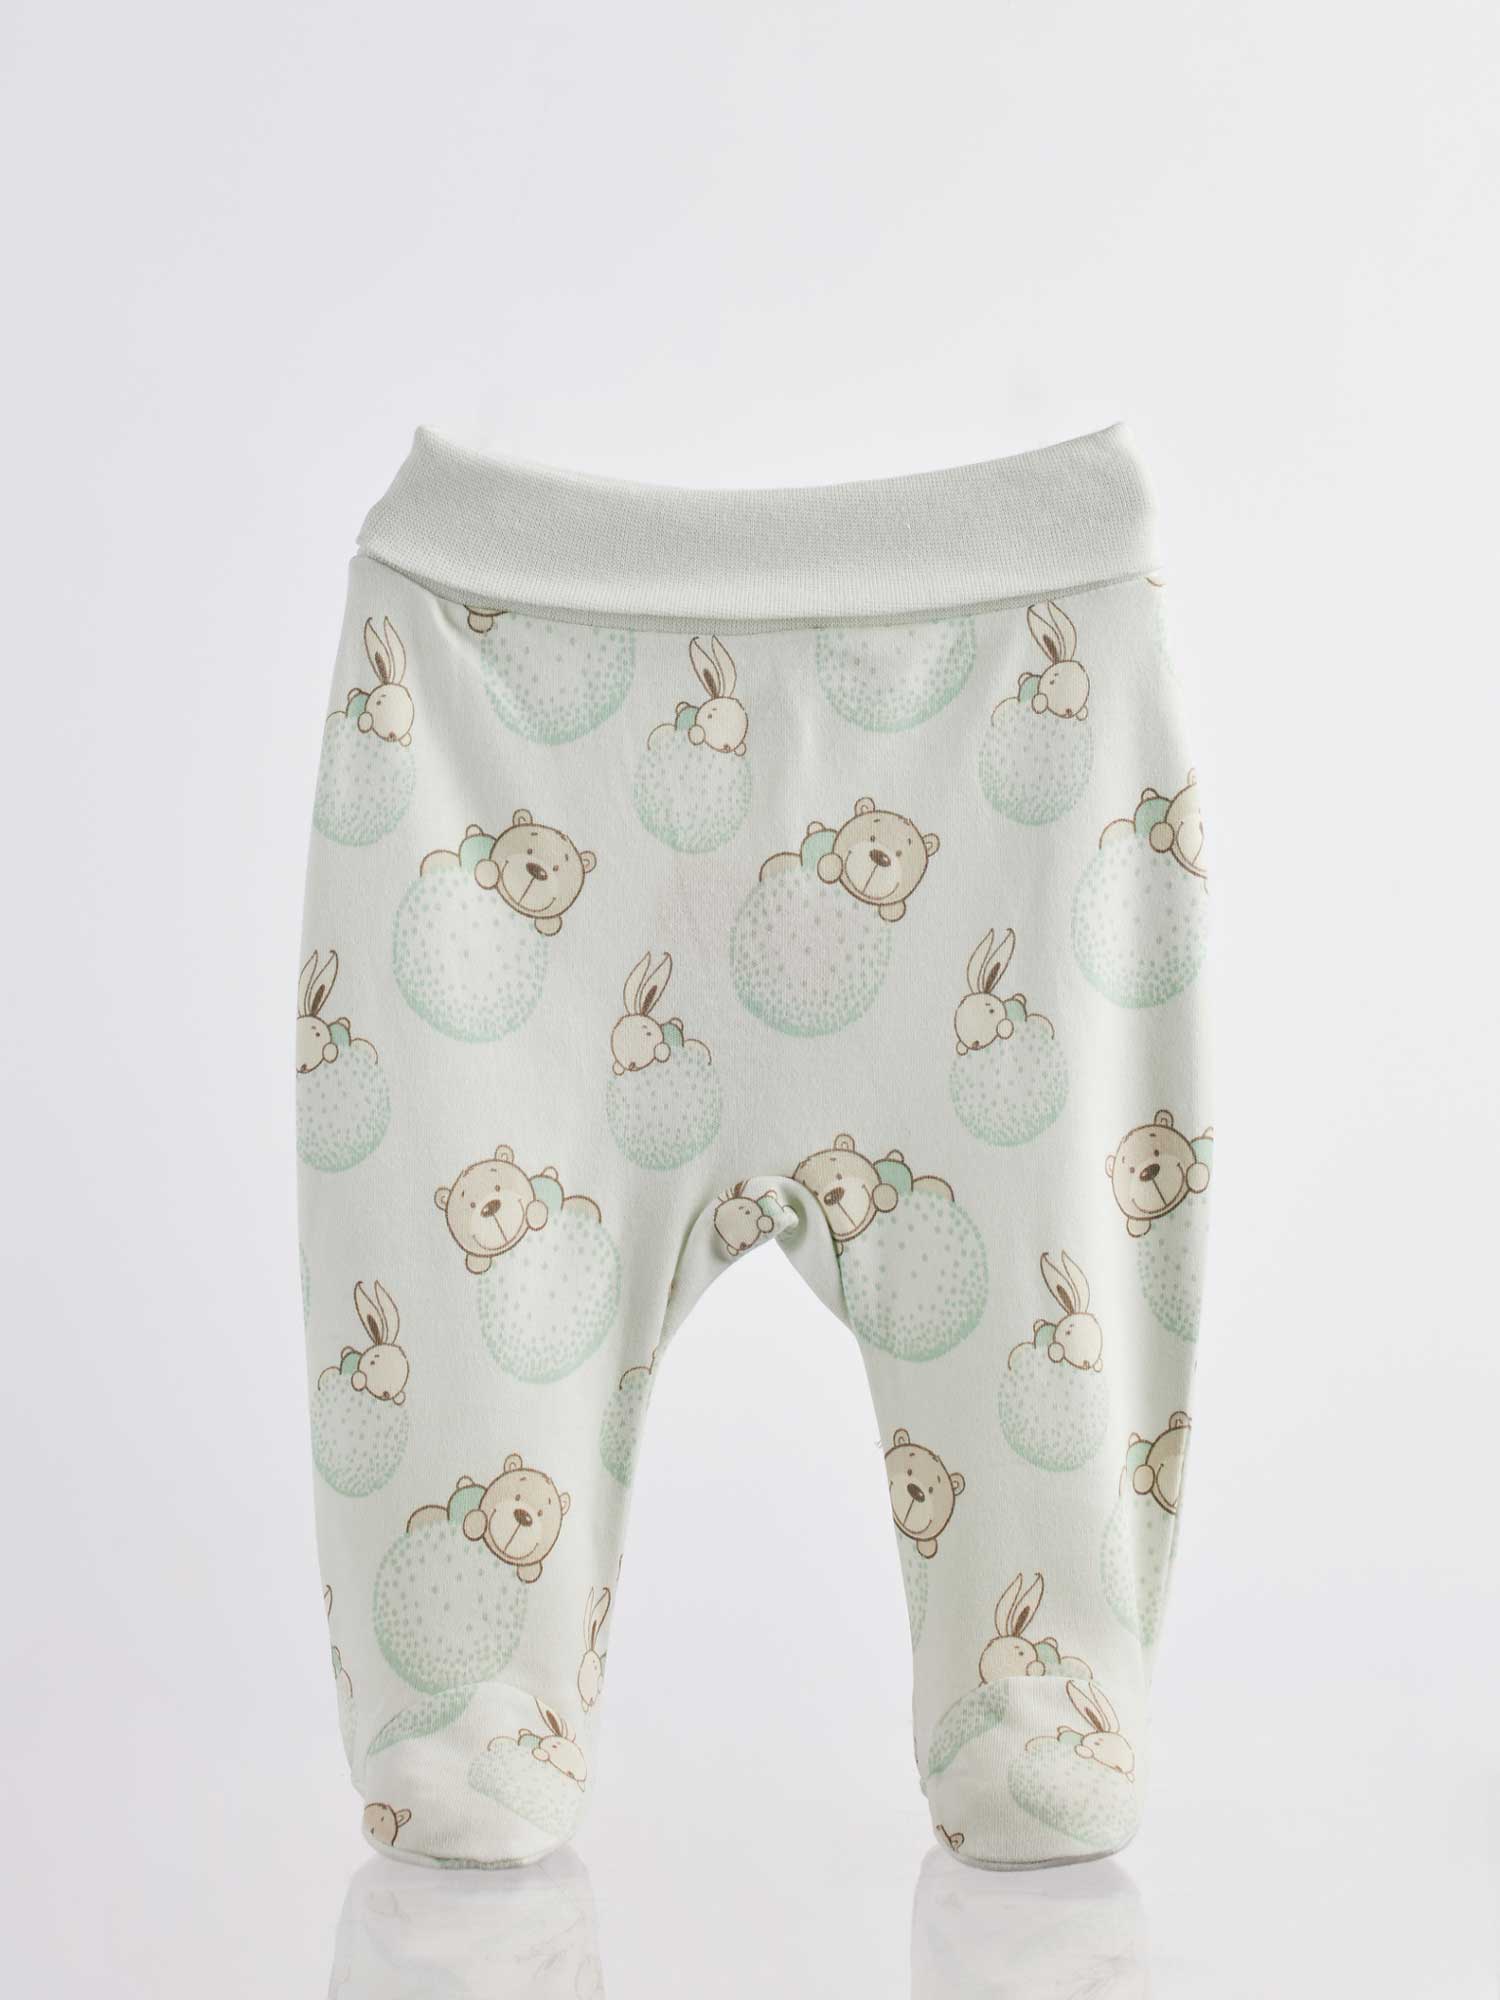 The Infant Pants Bear & Bunny 372 are ideal for your baby's everyday use. These pants feature a wide elastic waistband that won't squeeze or constrict your baby's belly as they play and discover. 